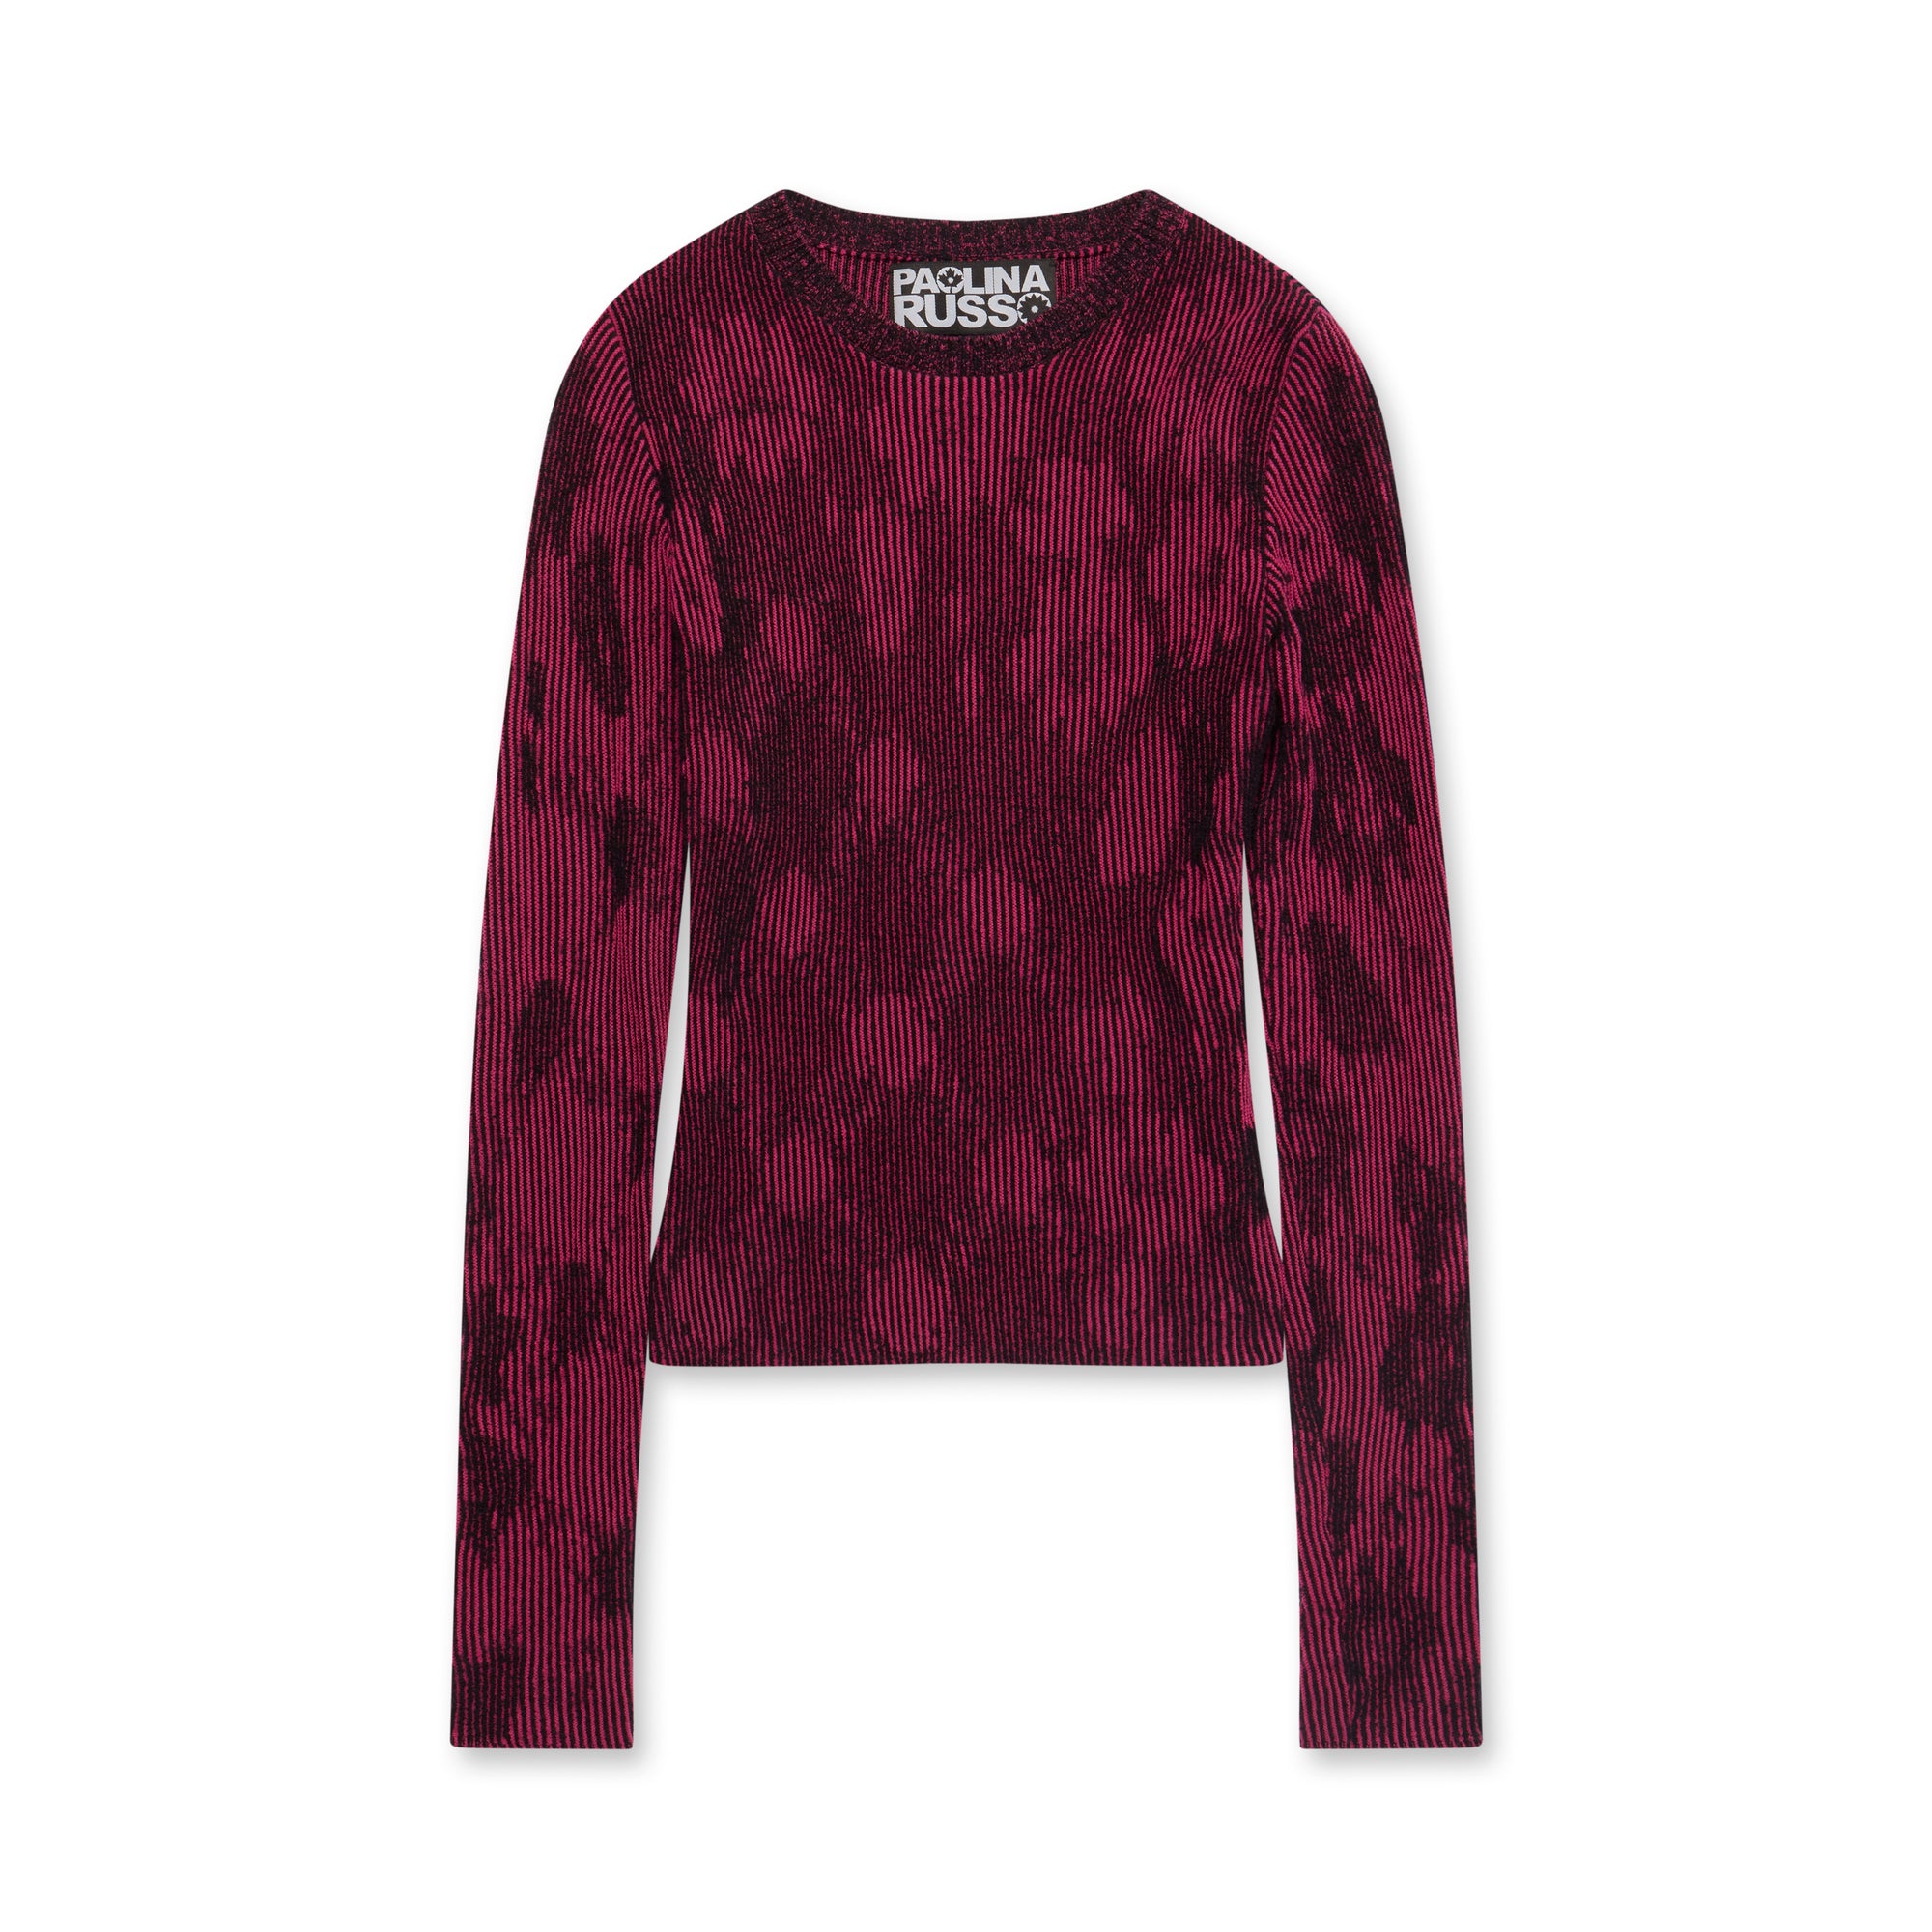 Paolina Russo - Women’s Illusion Knit Long Sleeve Top - (Magenta/Black) view 5